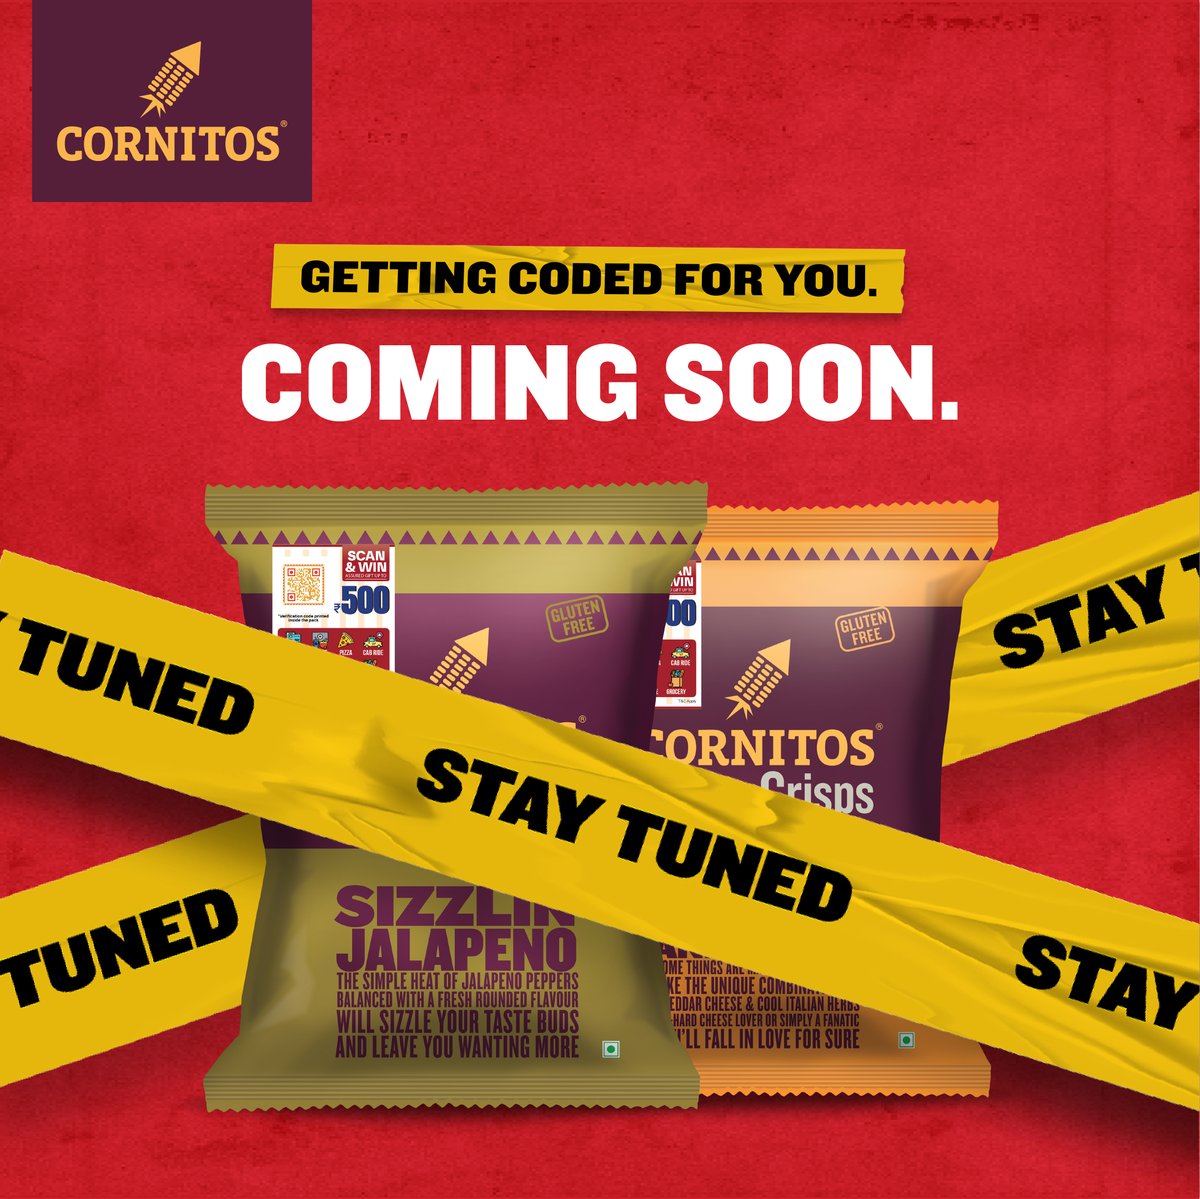 Shhh…can you keep a secret? 
We are planning something special for you all.​
Stay tuned to find out what it is.​
​
#Cornitos #CrunchAndWin #staytuned #guesswhatscoming #Guess #WildAsYouLike #ILoveCornitos #Crusties #CornyTheChimp #ILoveNachos #Nachos #Dip #Snacks #Snacking